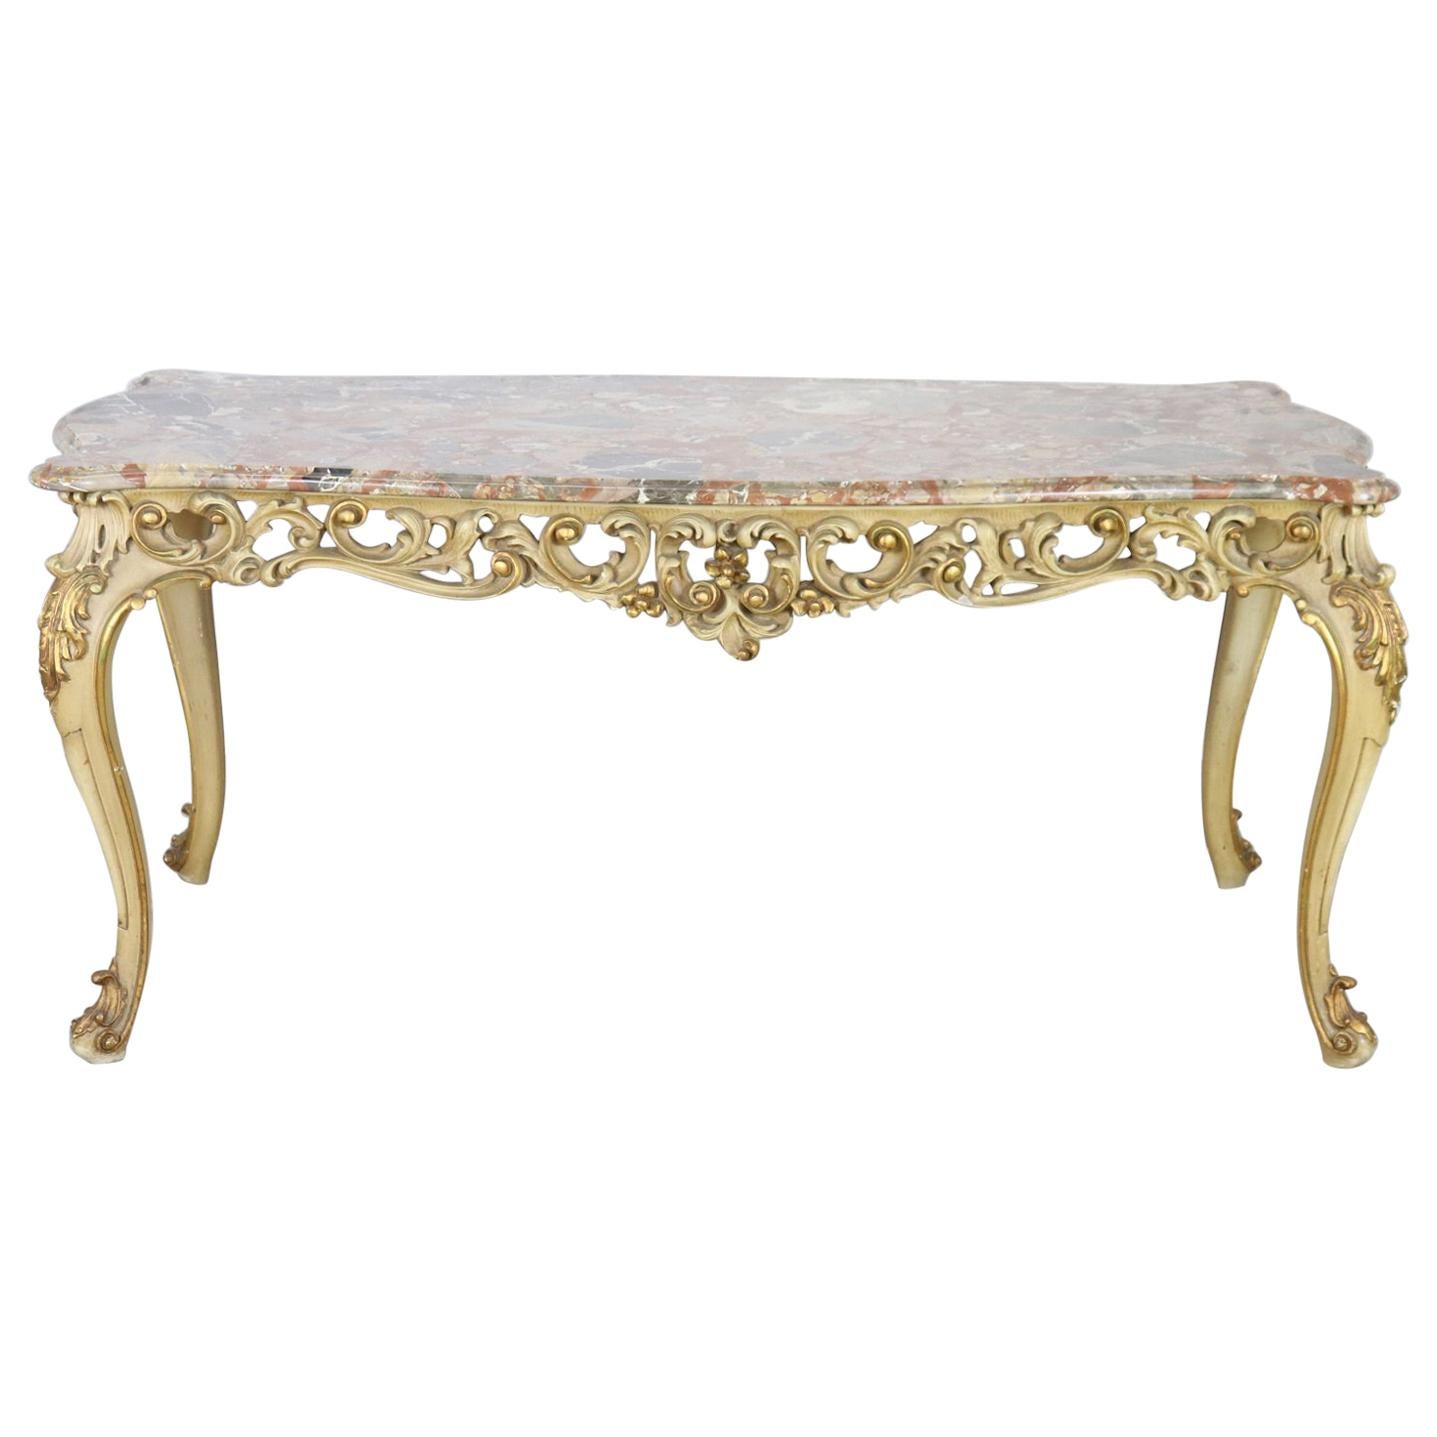 20th Century Italian Baroque Style Carved Lacquered Gilded Wood Dining Table